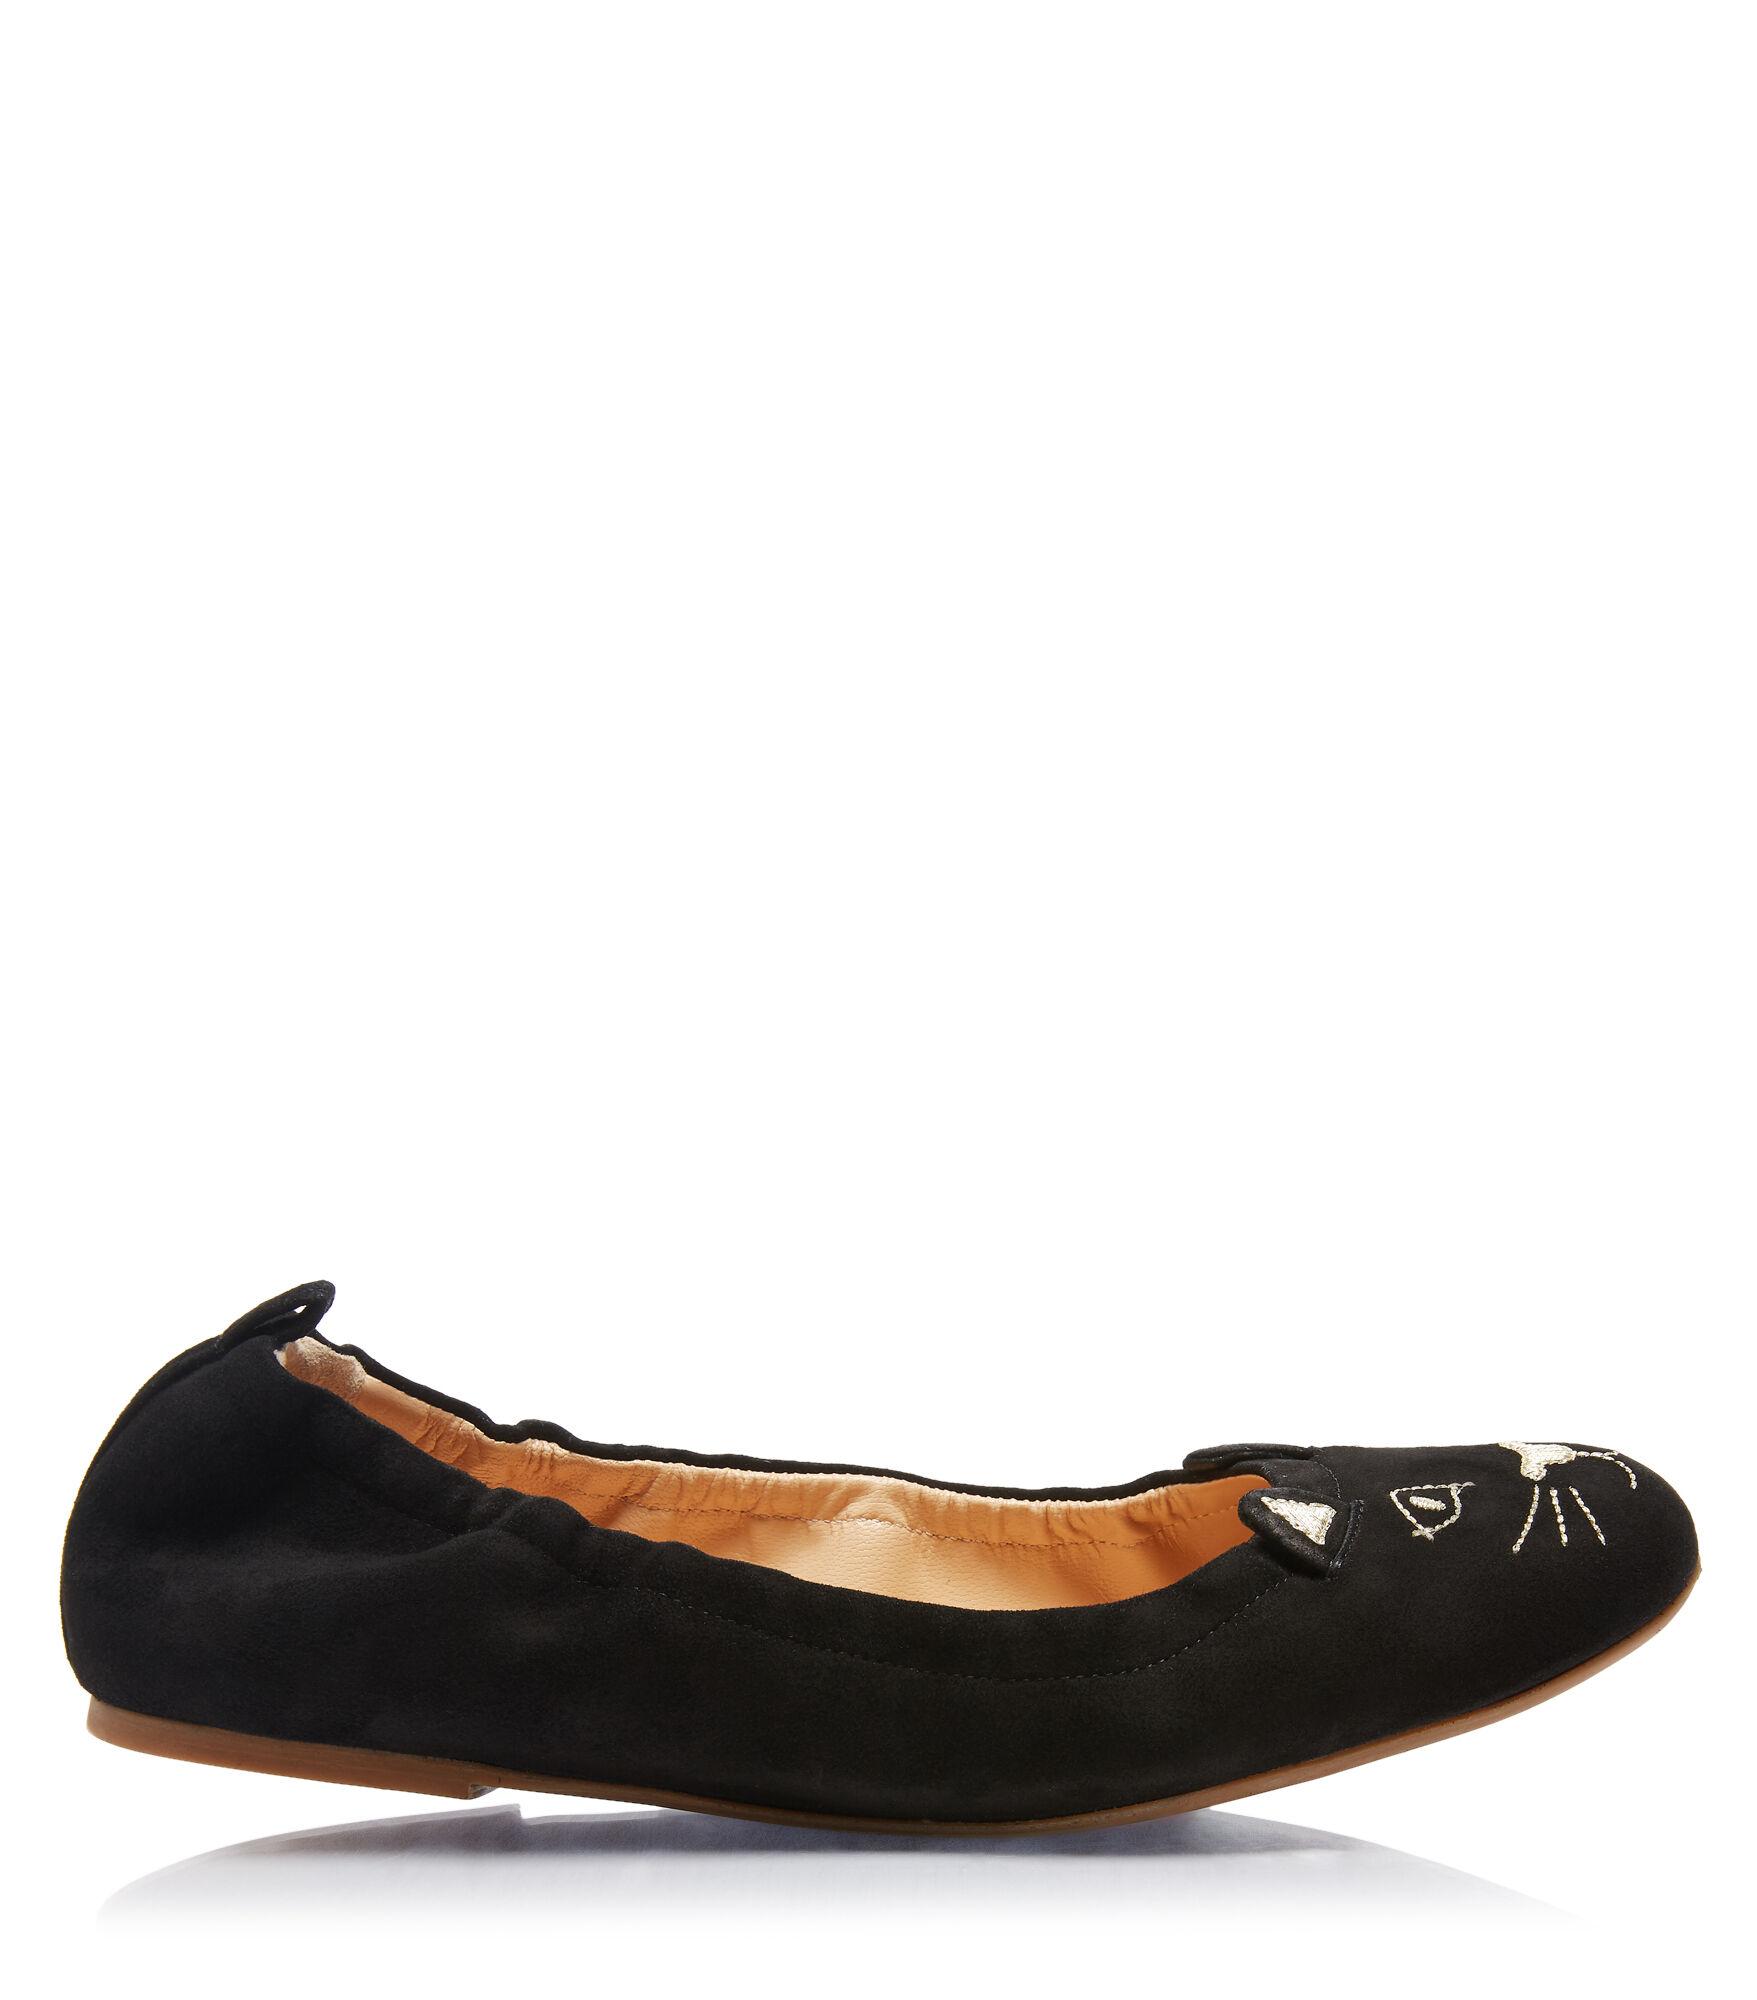 Charlotte Olympia Leather Kitty Ballerina Flats in Black - Save 49% - Lyst